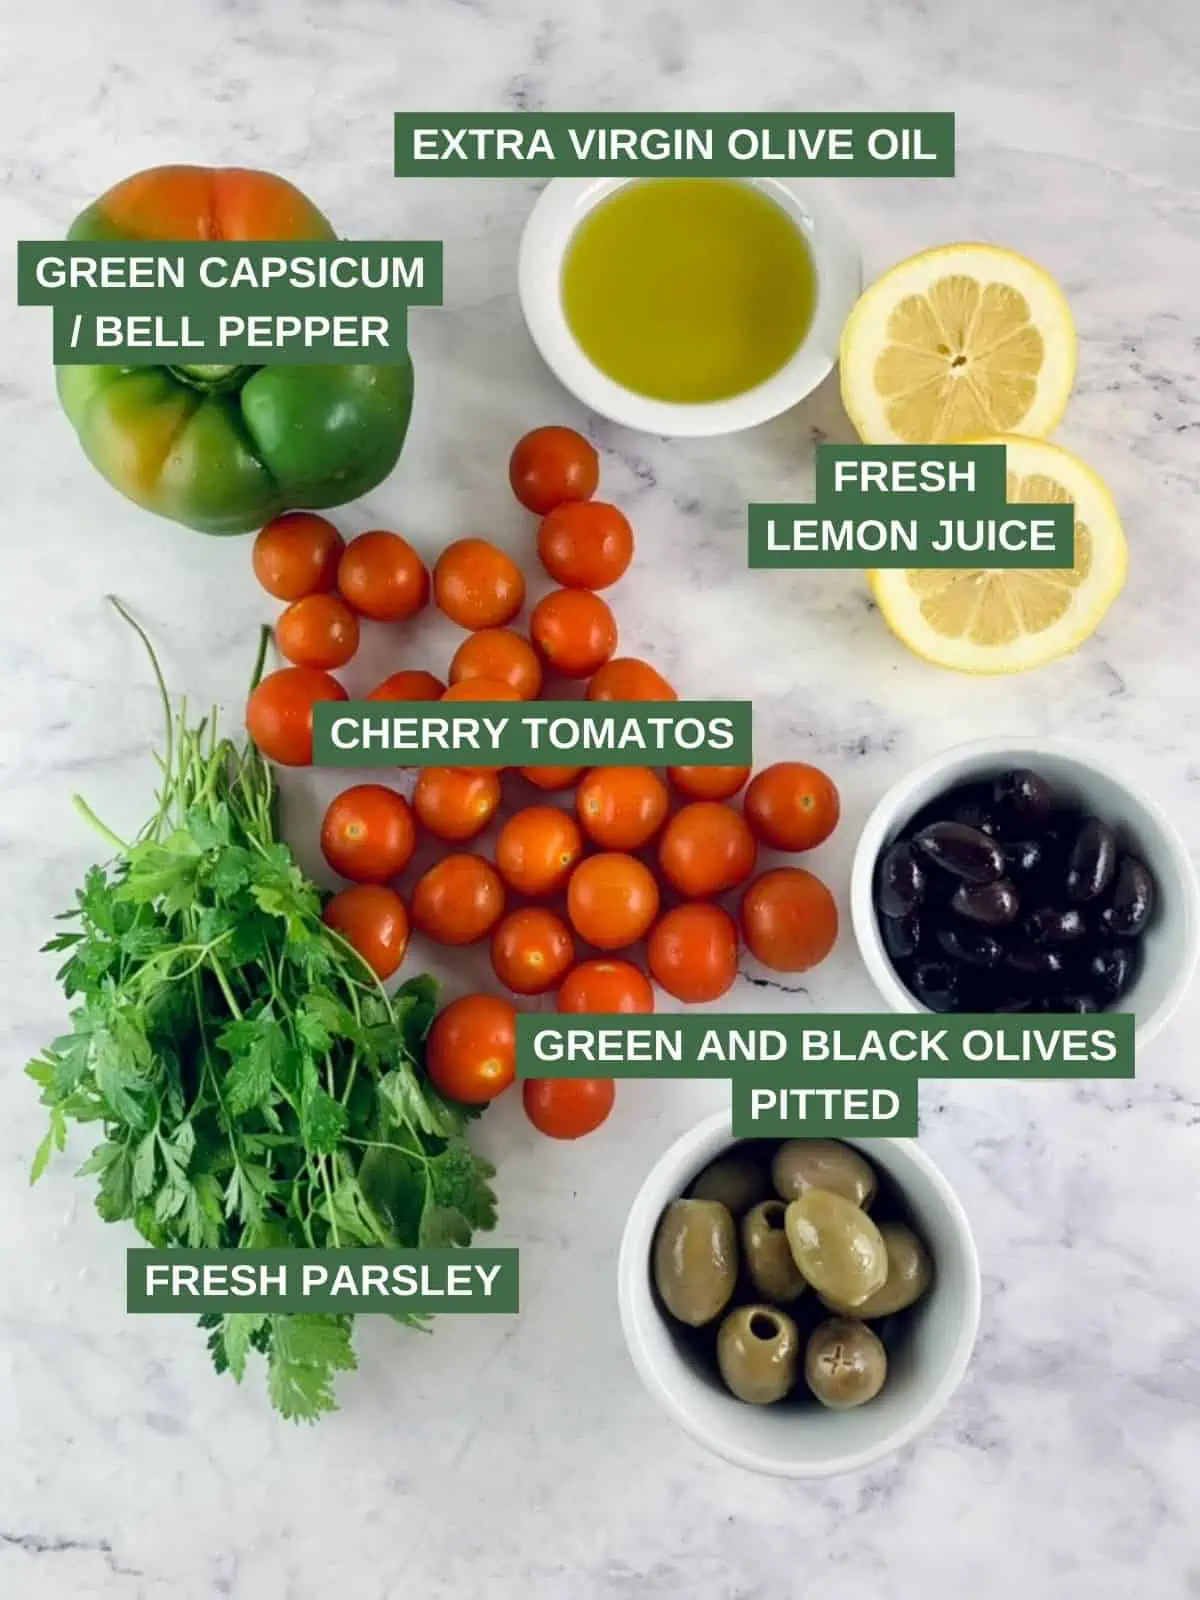 Labelled ingredients needed to make an olive salad.